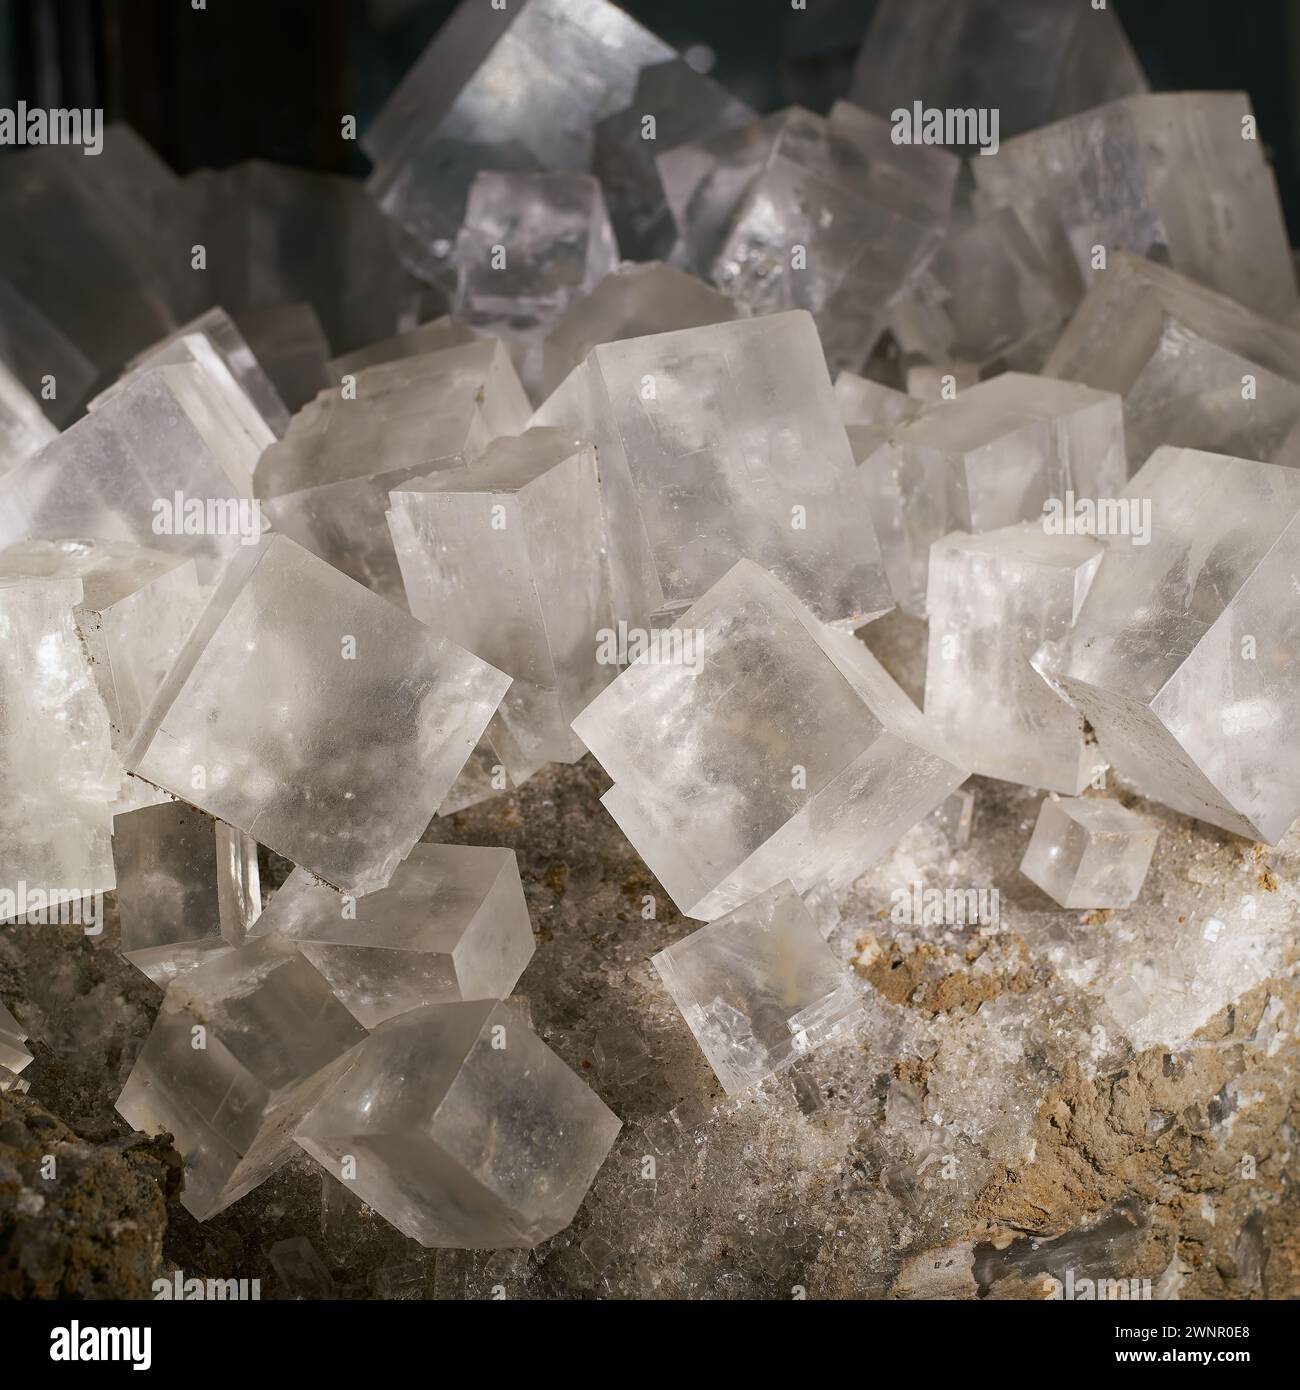 Cube-shaped crystals of the mineral halite in a mineral collection Stock Photo